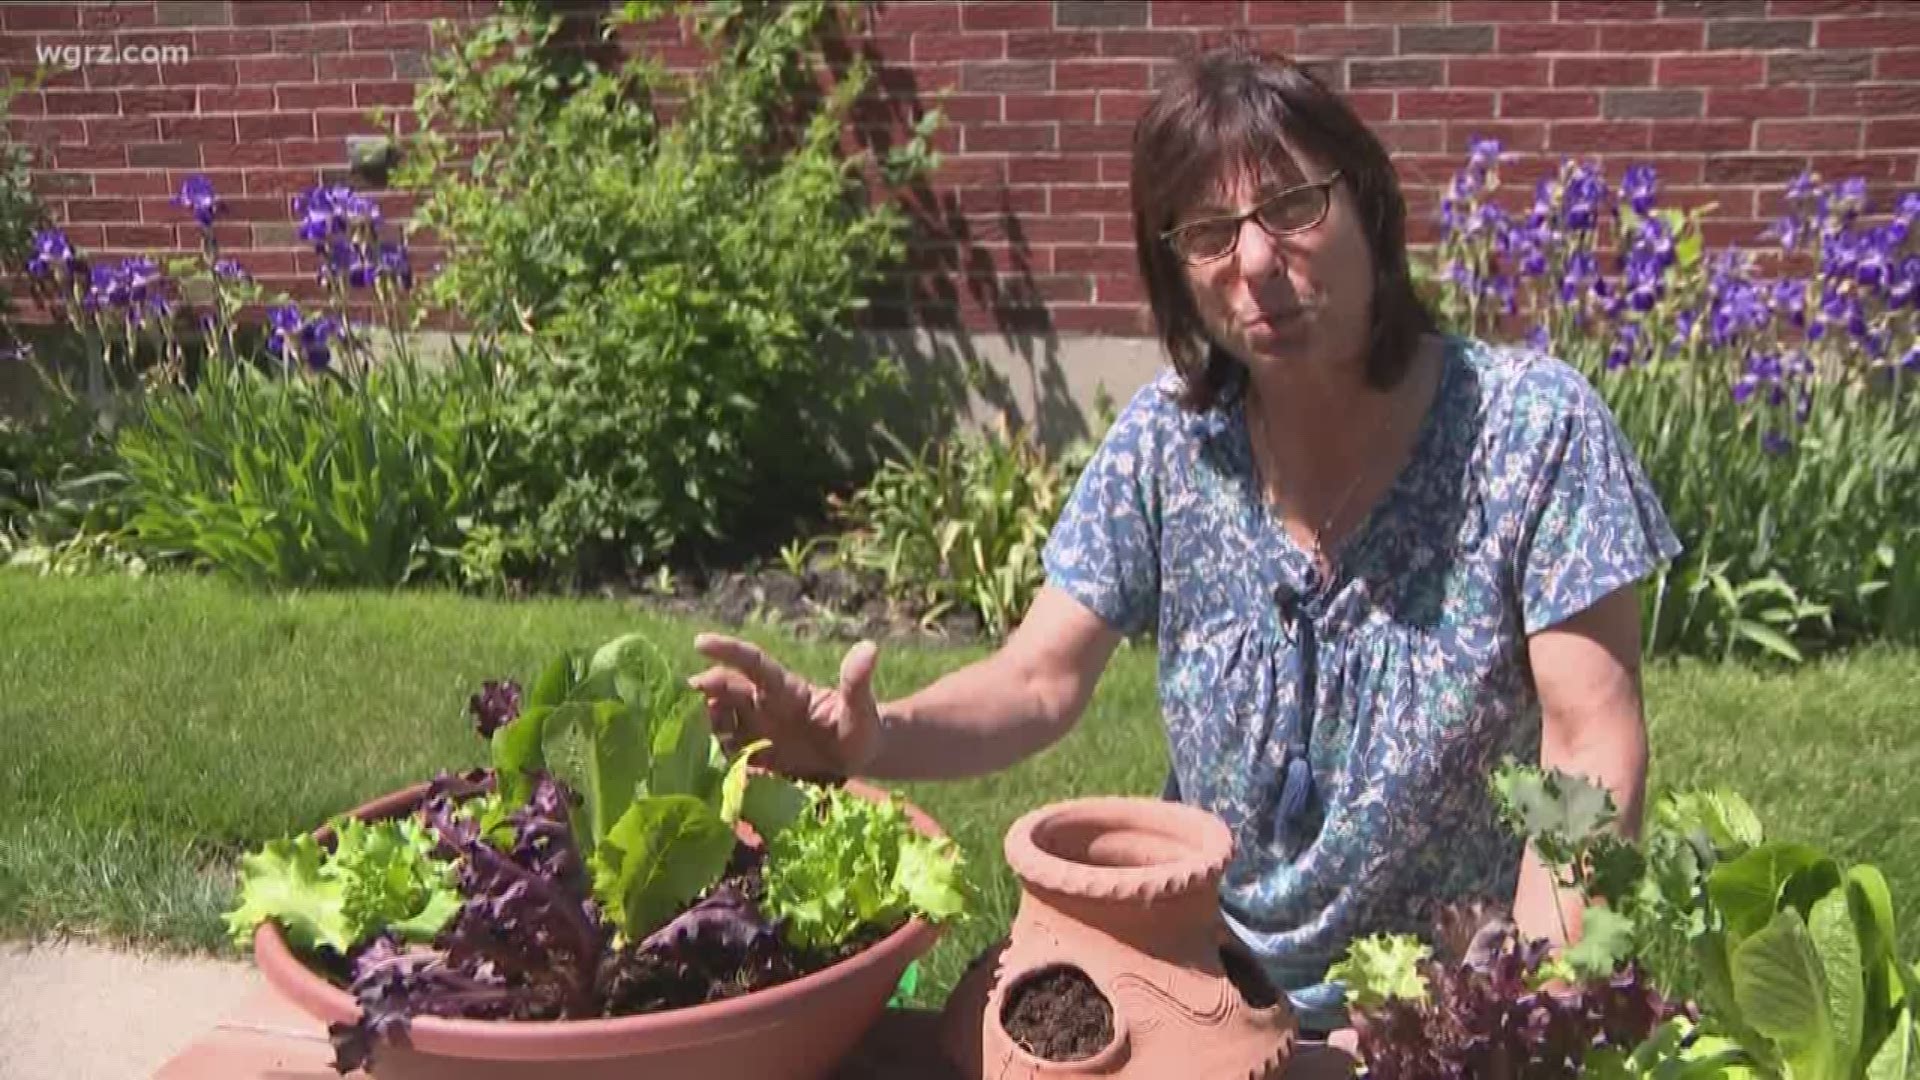 Gardening expert Jackie Albarella shows an easy way to plant lettuce so you can have fresh salads all season long.